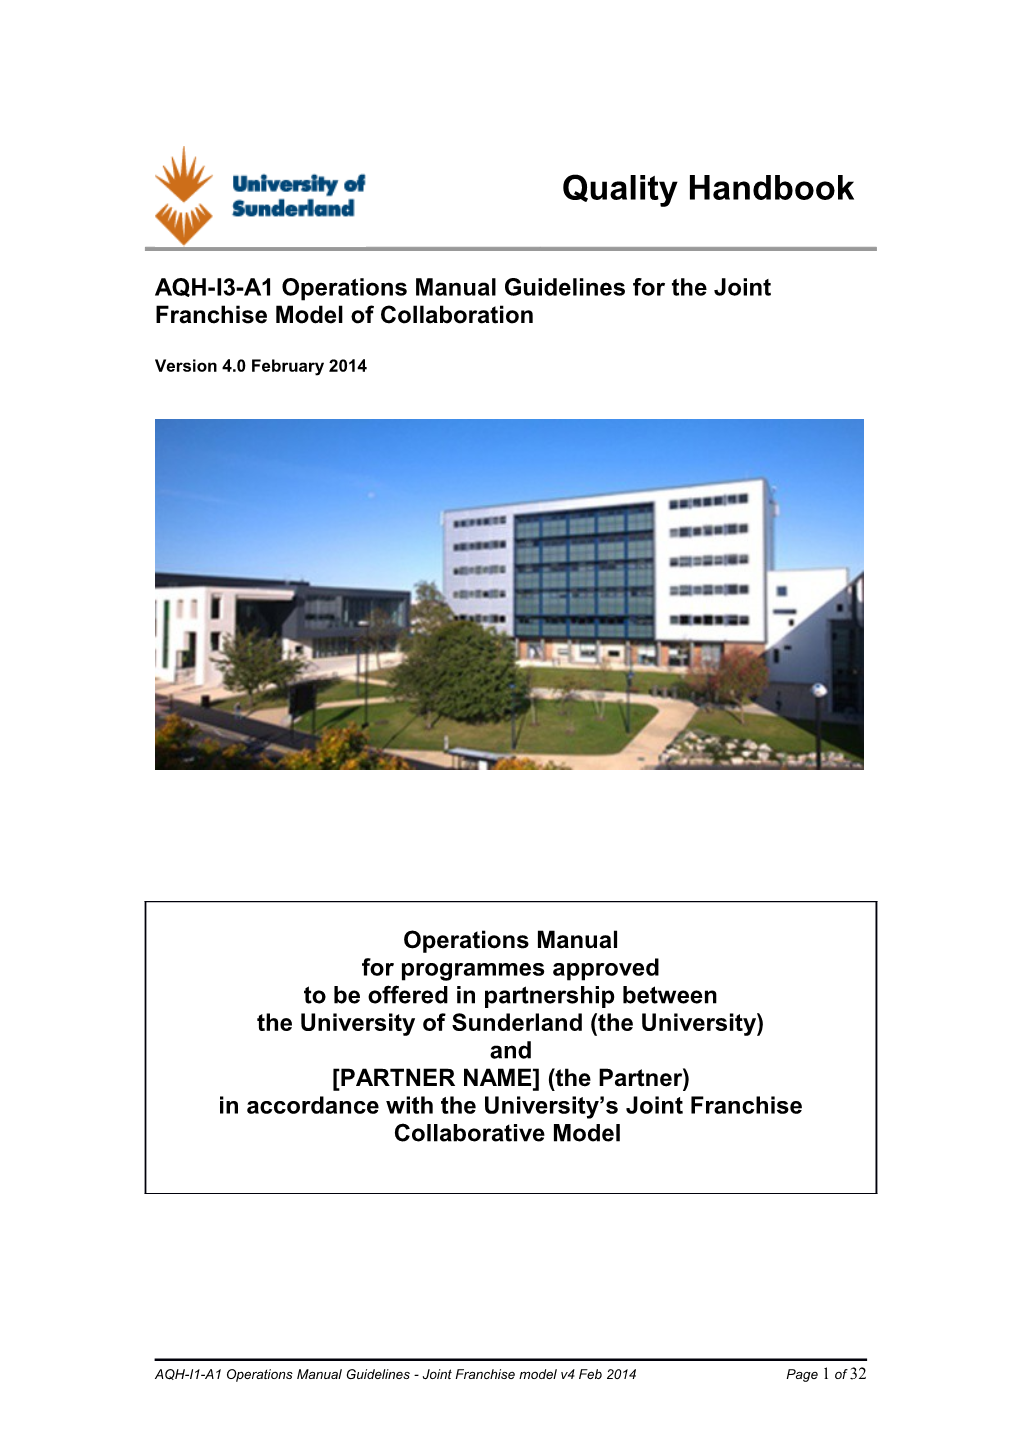 AQH-I3-A1 Operations Manual Guidelines for the Joint Franchise Model of Collaboration